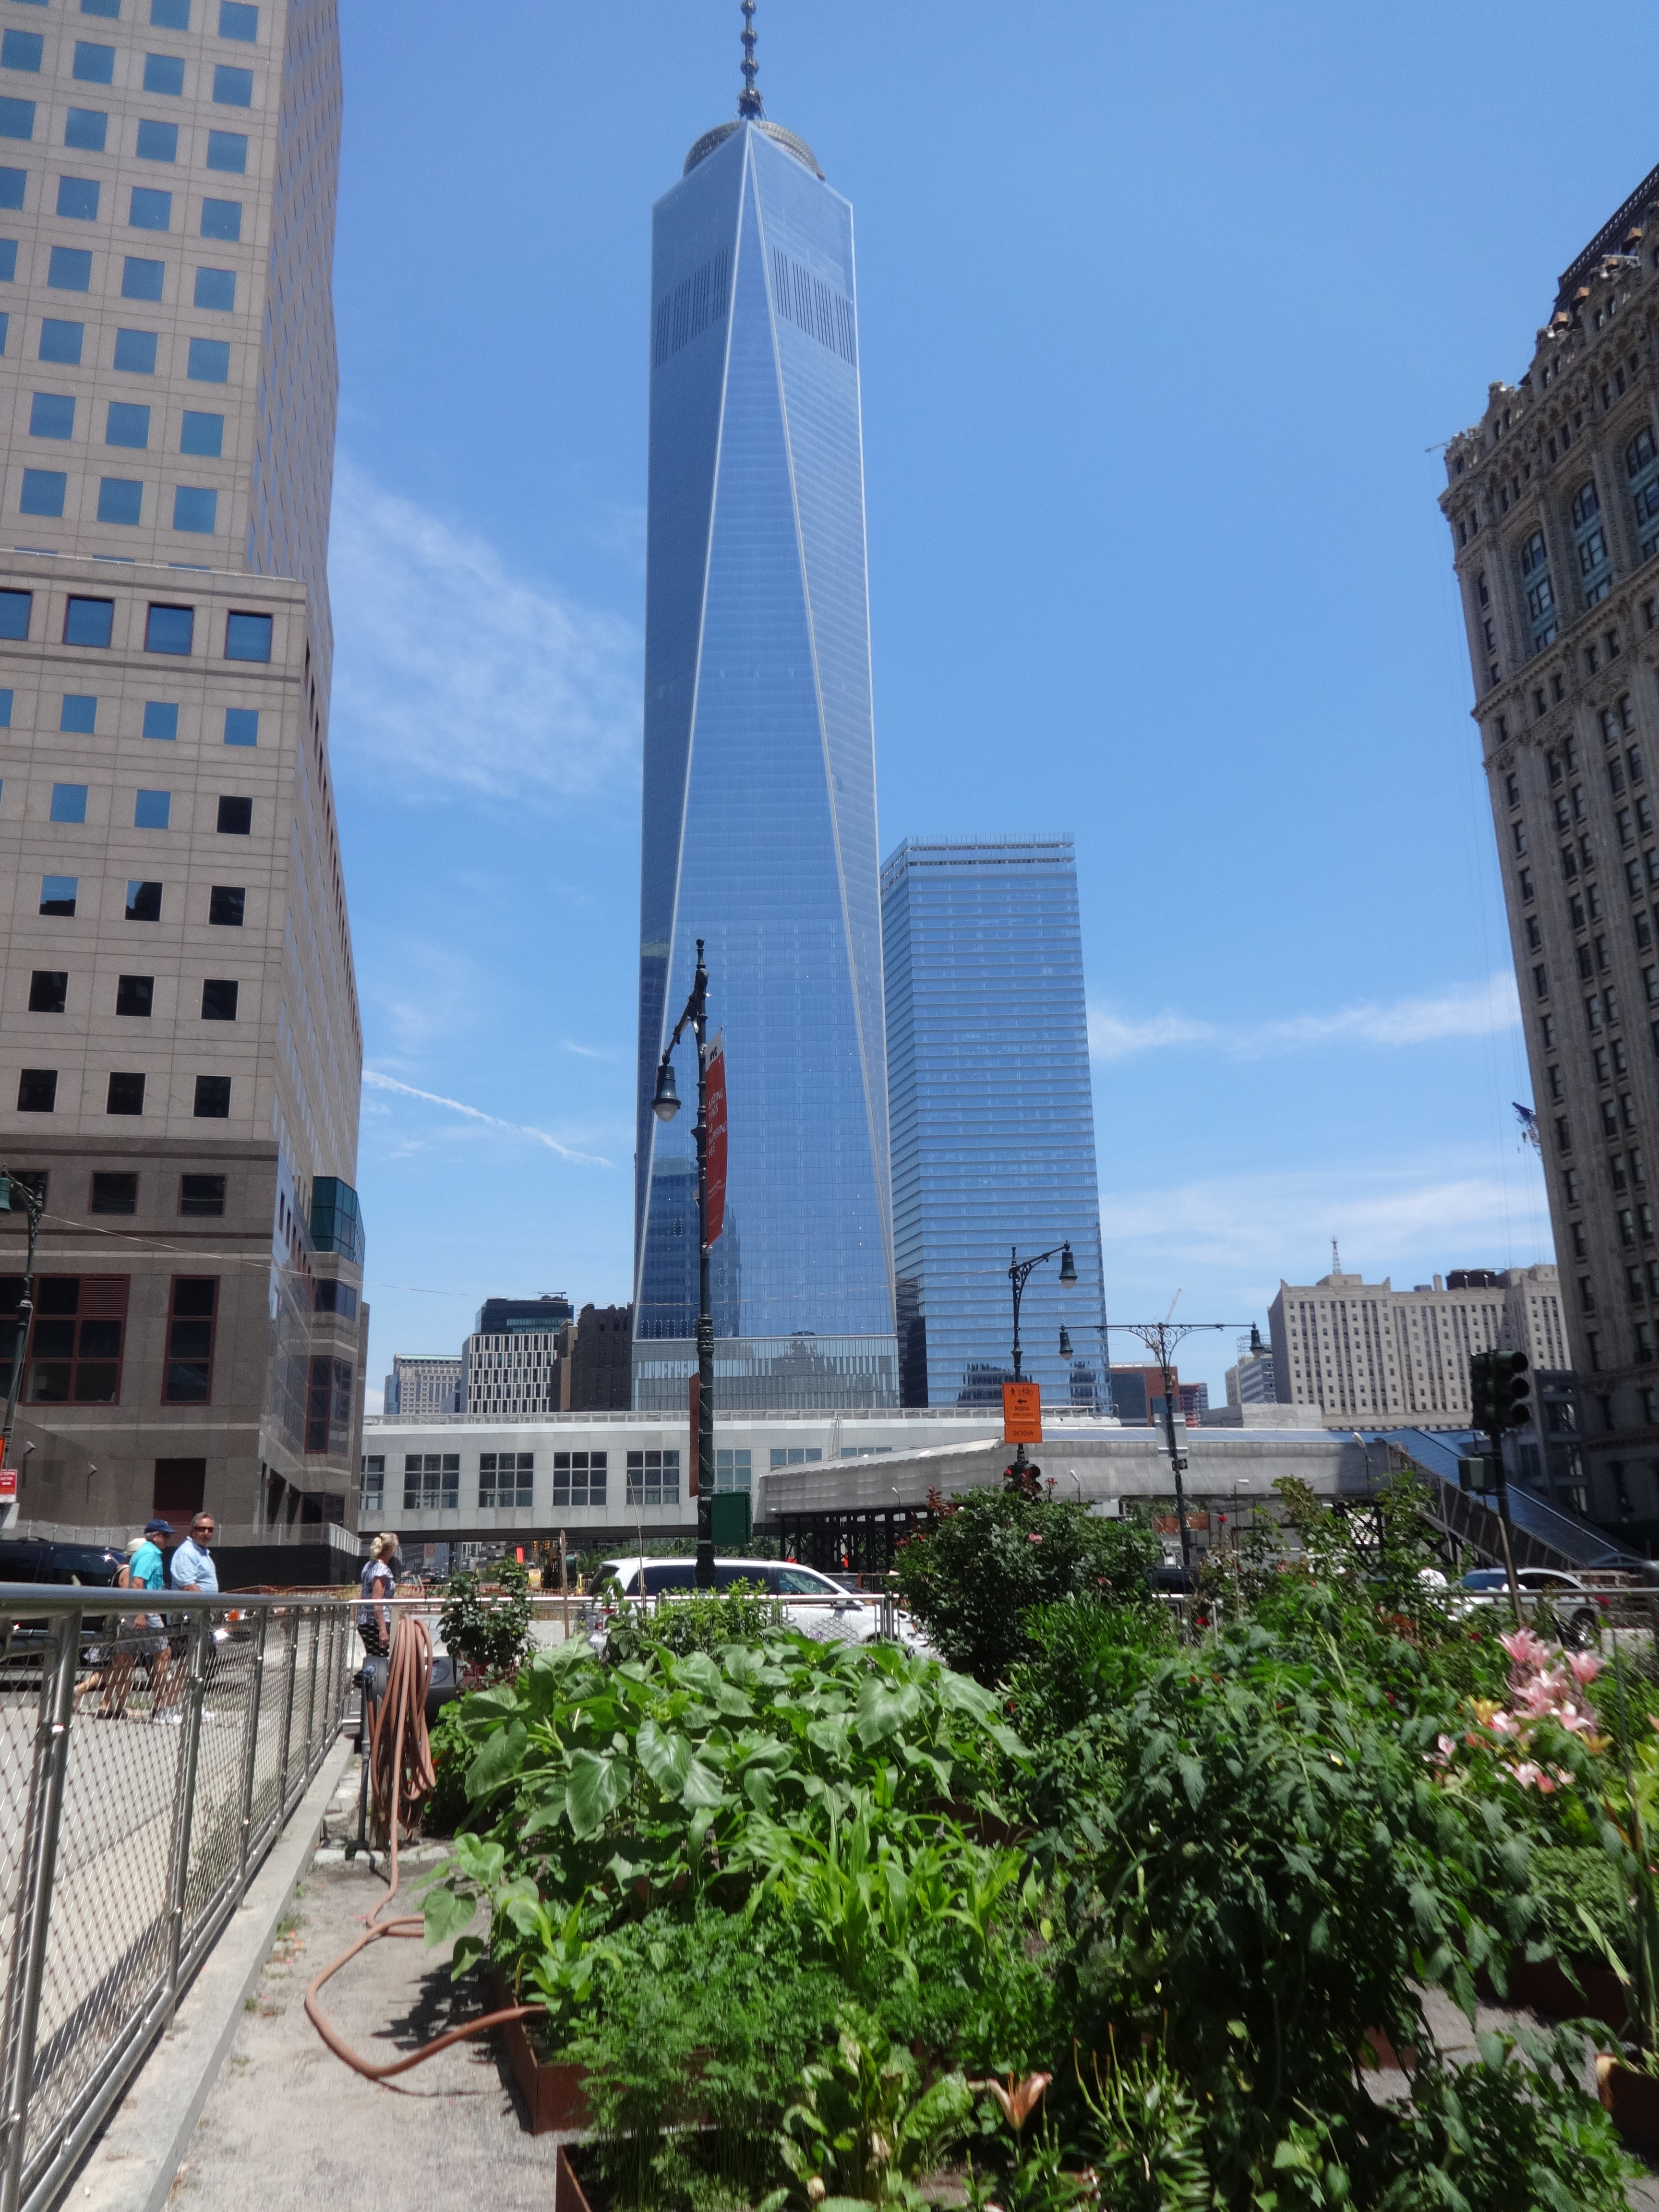 Garden and Freedom Tower 6-29-2014